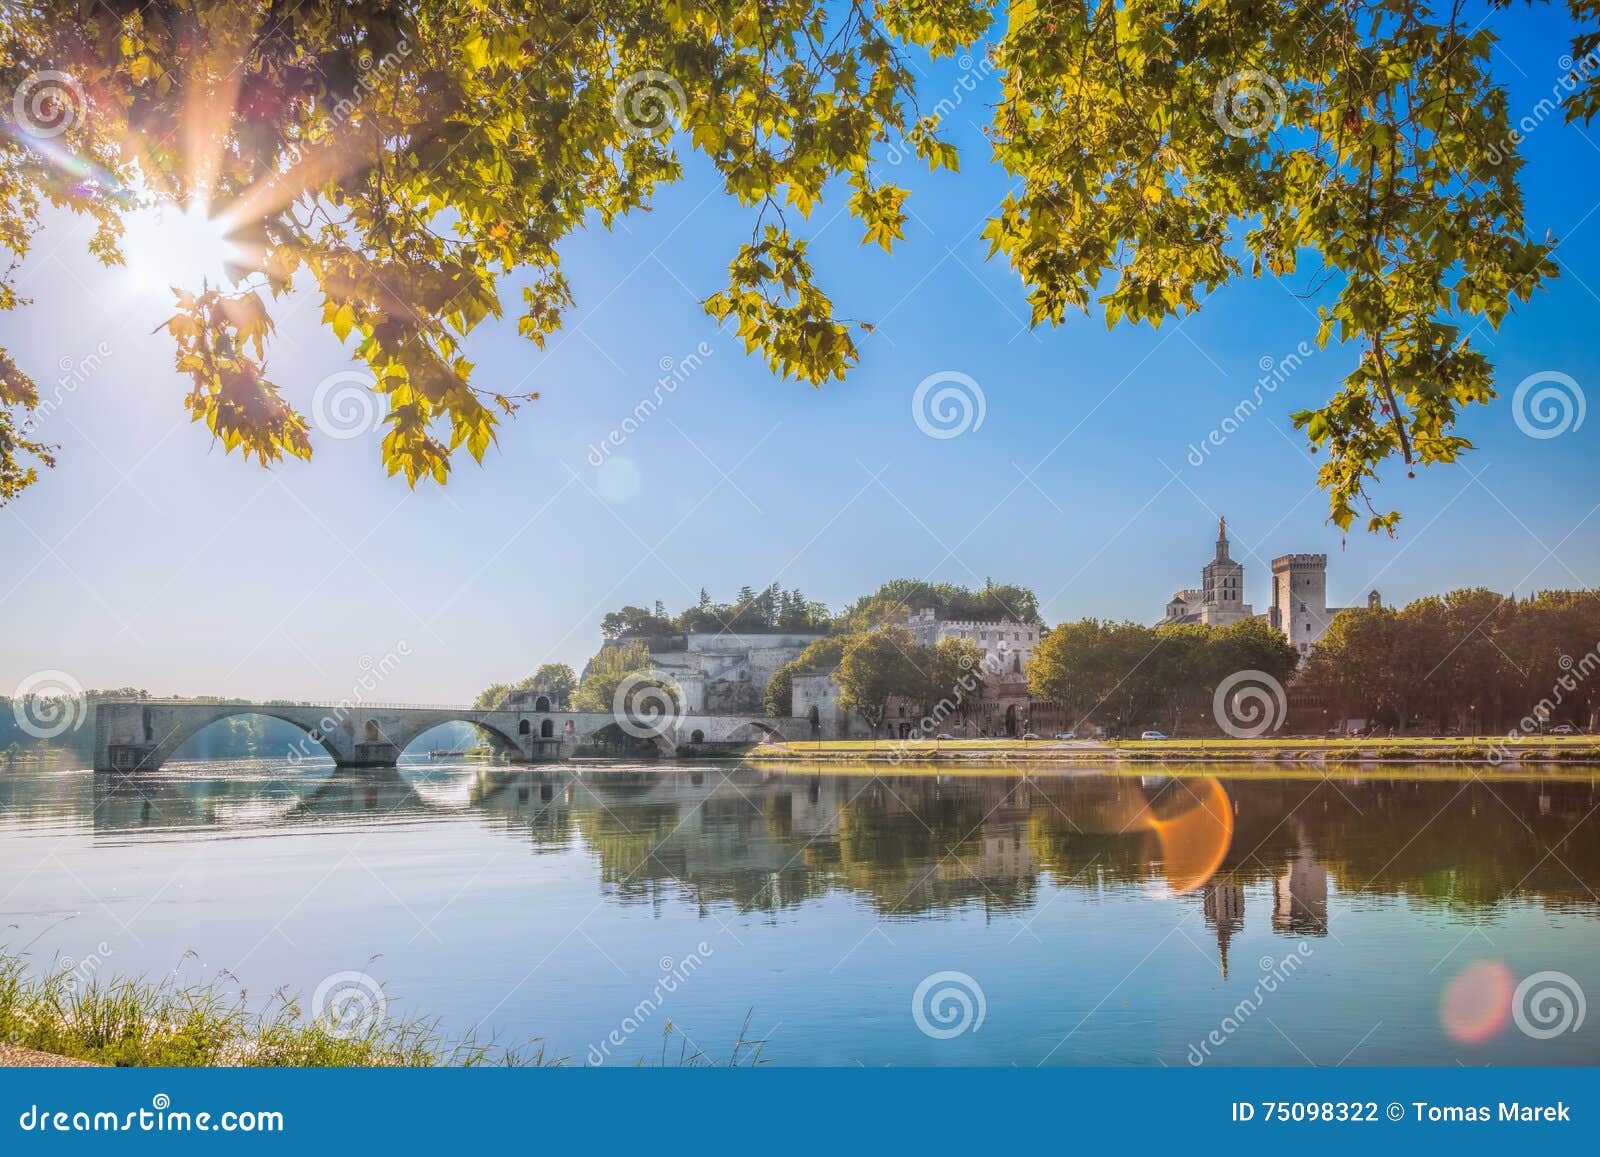 avignon bridge with popes palace in provence, france